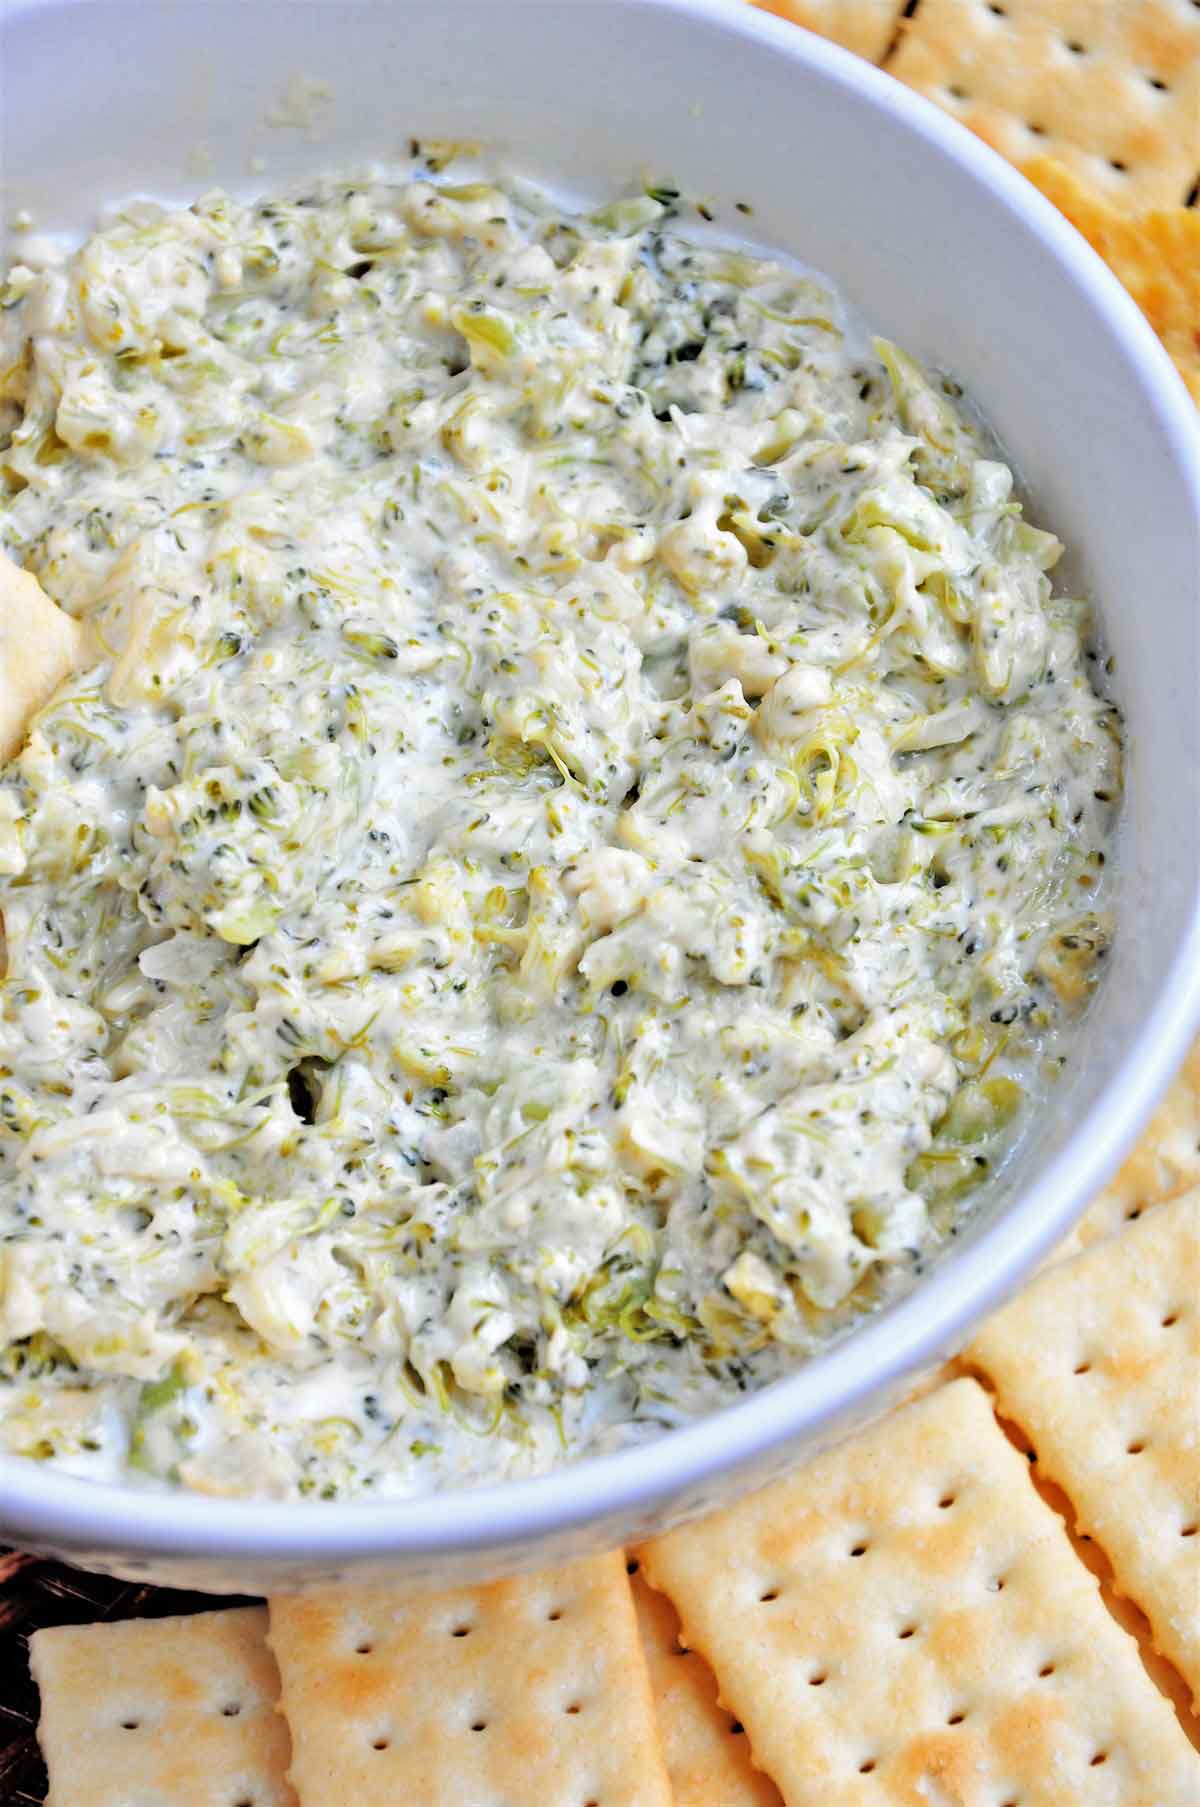 Broccoli cheese dip in a bowl served with crackers.